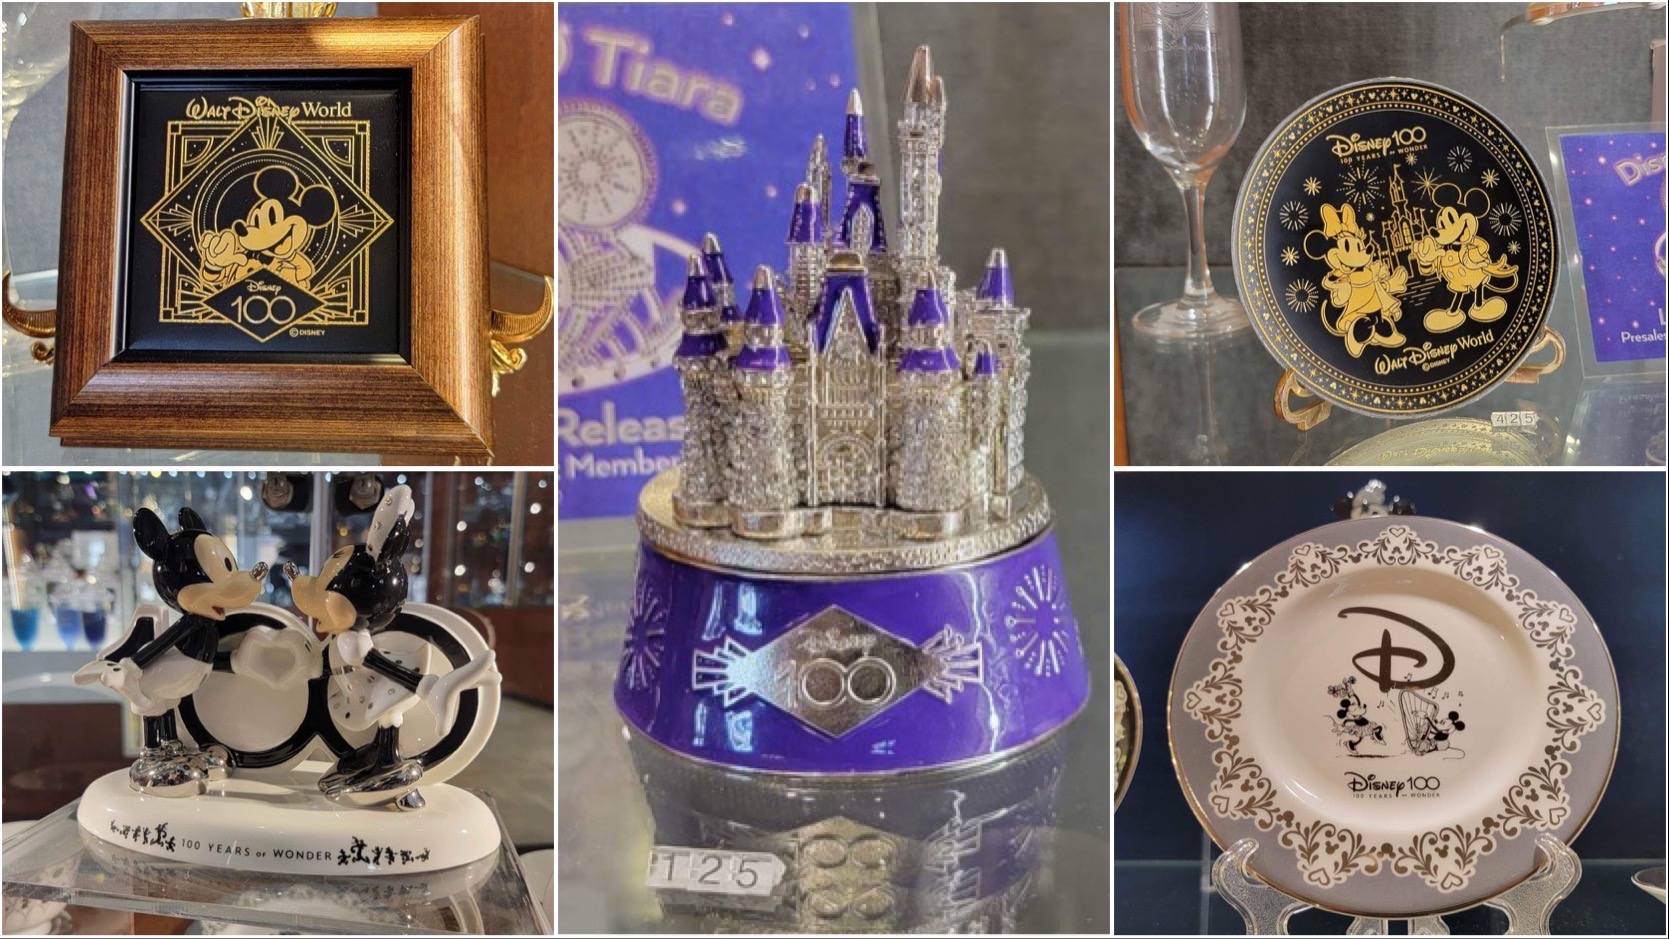 New Disney100 Statues, Plates And More Available At Disney Springs!